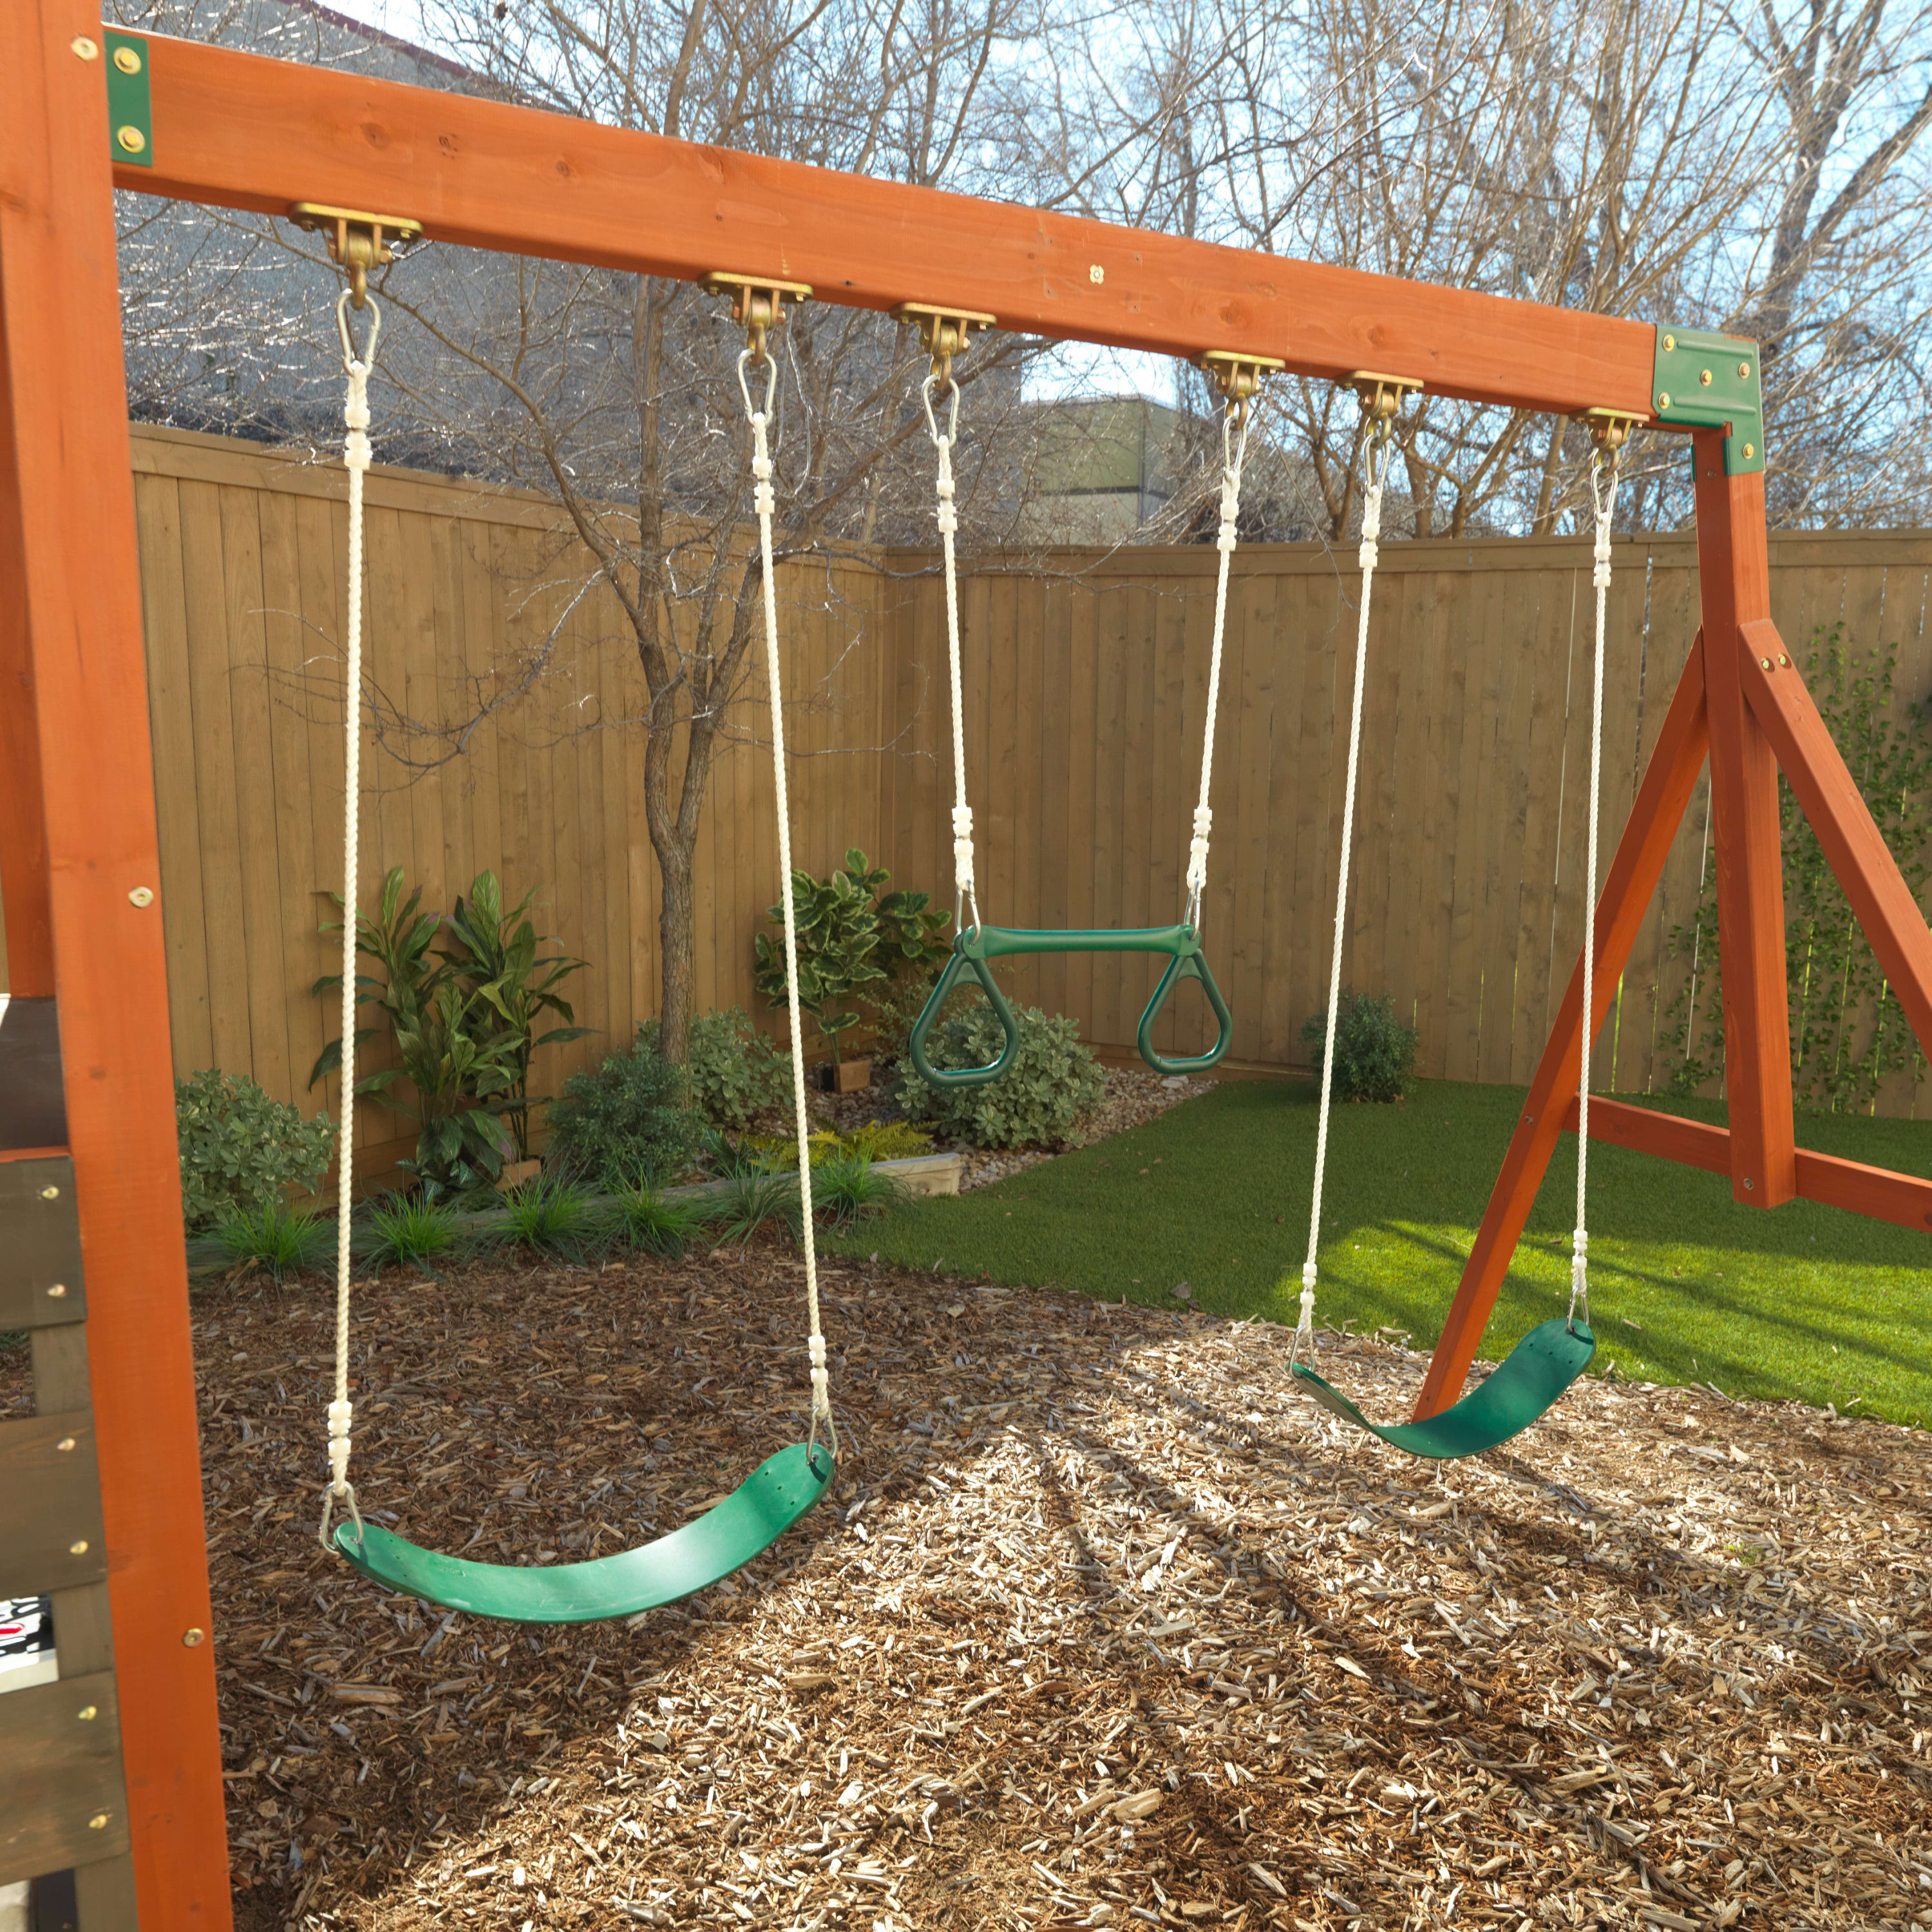 KidKraft Austin Wooden Outdoor Swing Set with Slides, Swings, Kitchen and Rock Wall - image 13 of 27